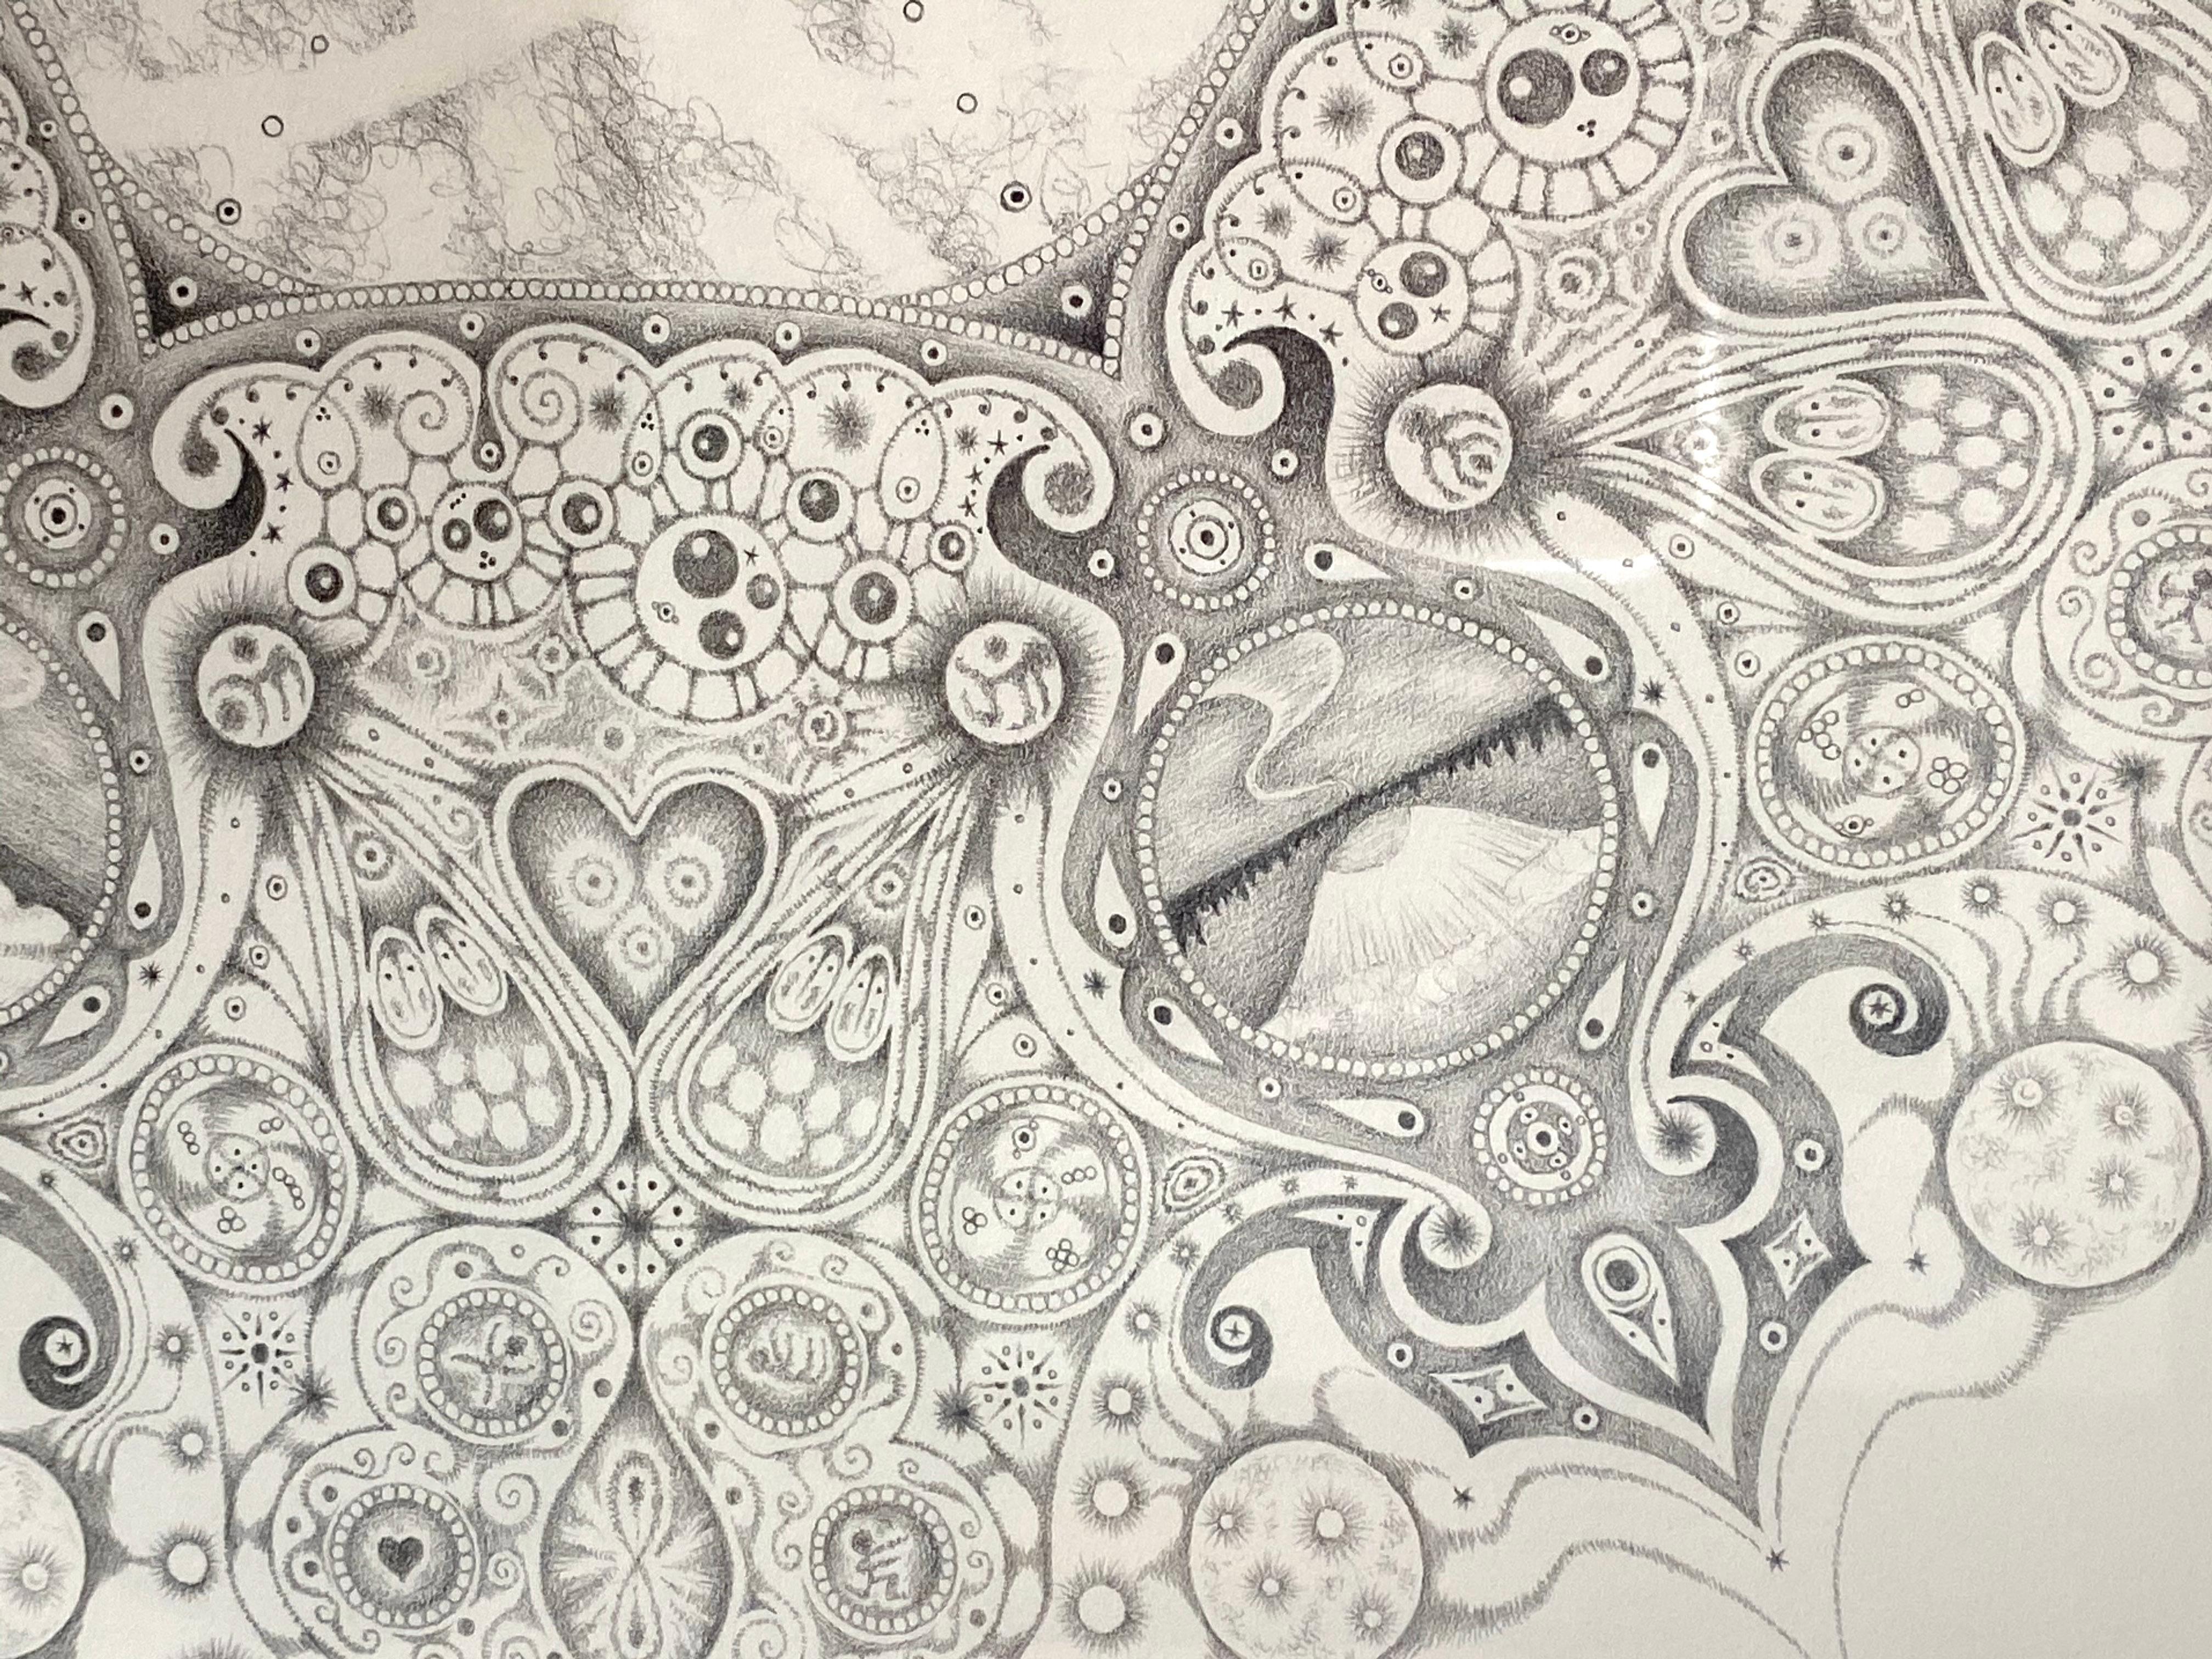 Snowflakes 84 Forester, Mandala Pencil Drawing, Owl, Cosmic Imagery, Landscapes For Sale 5